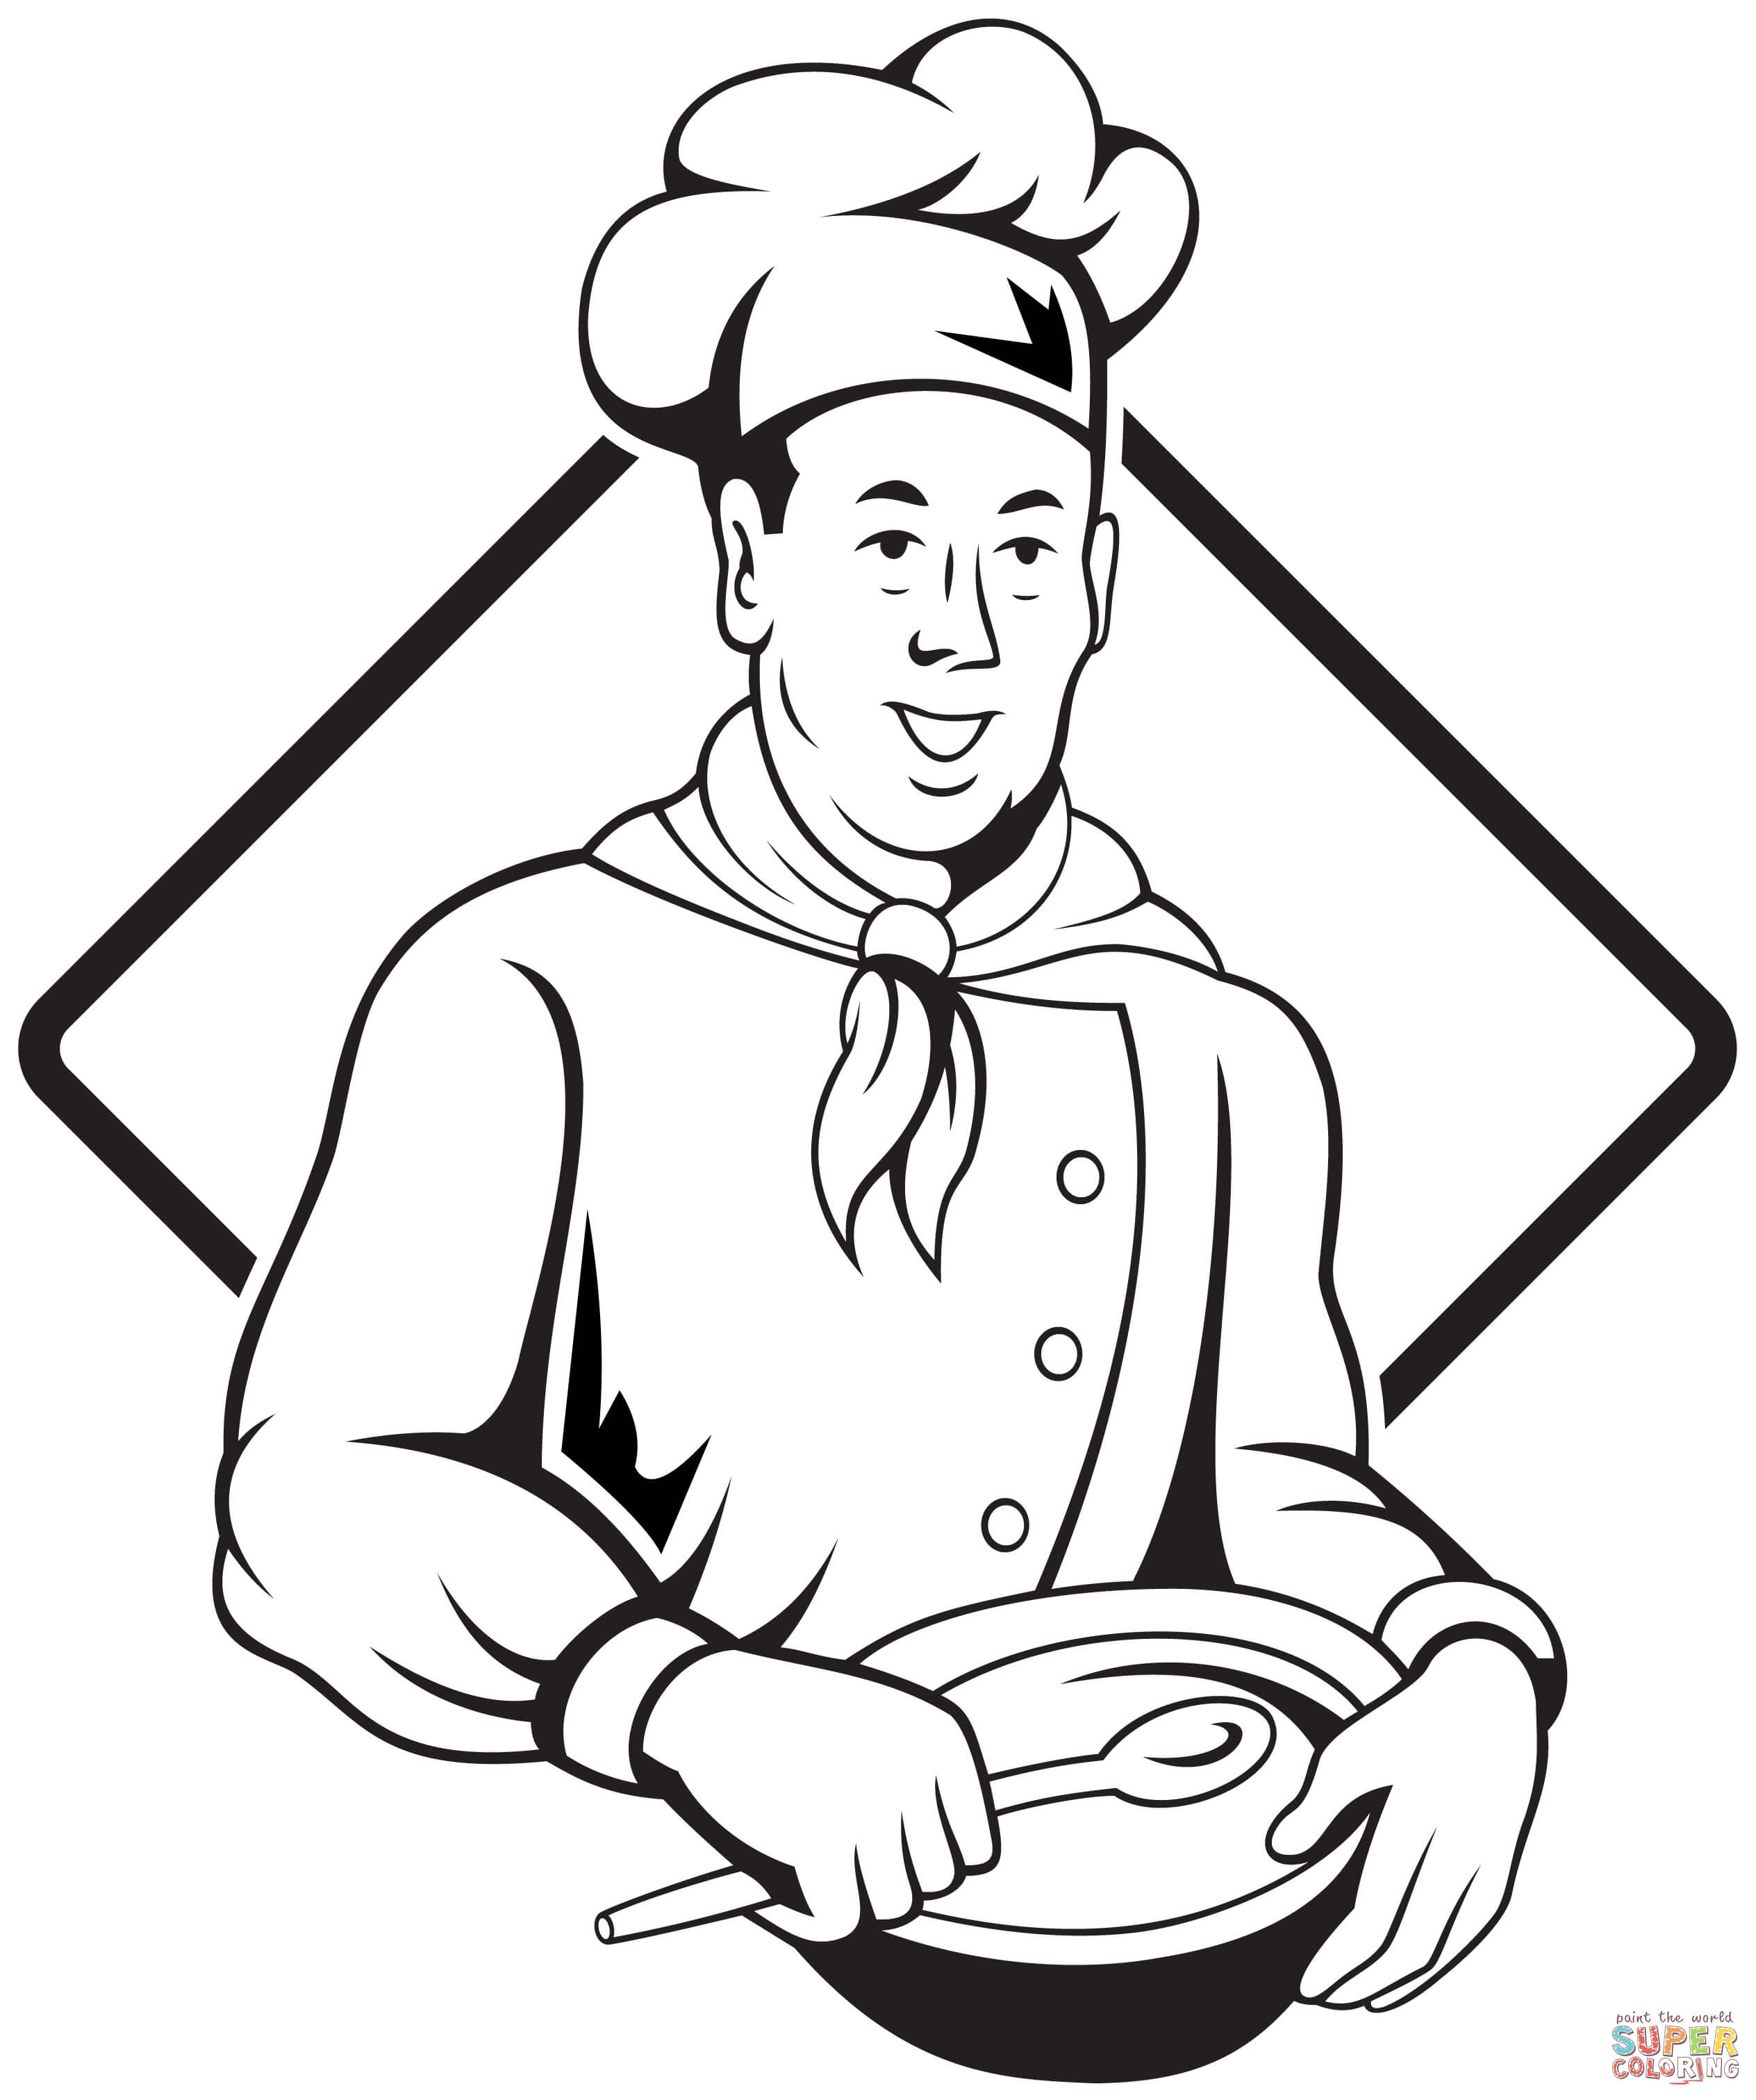 Professions coloring pages | Free Coloring Pages